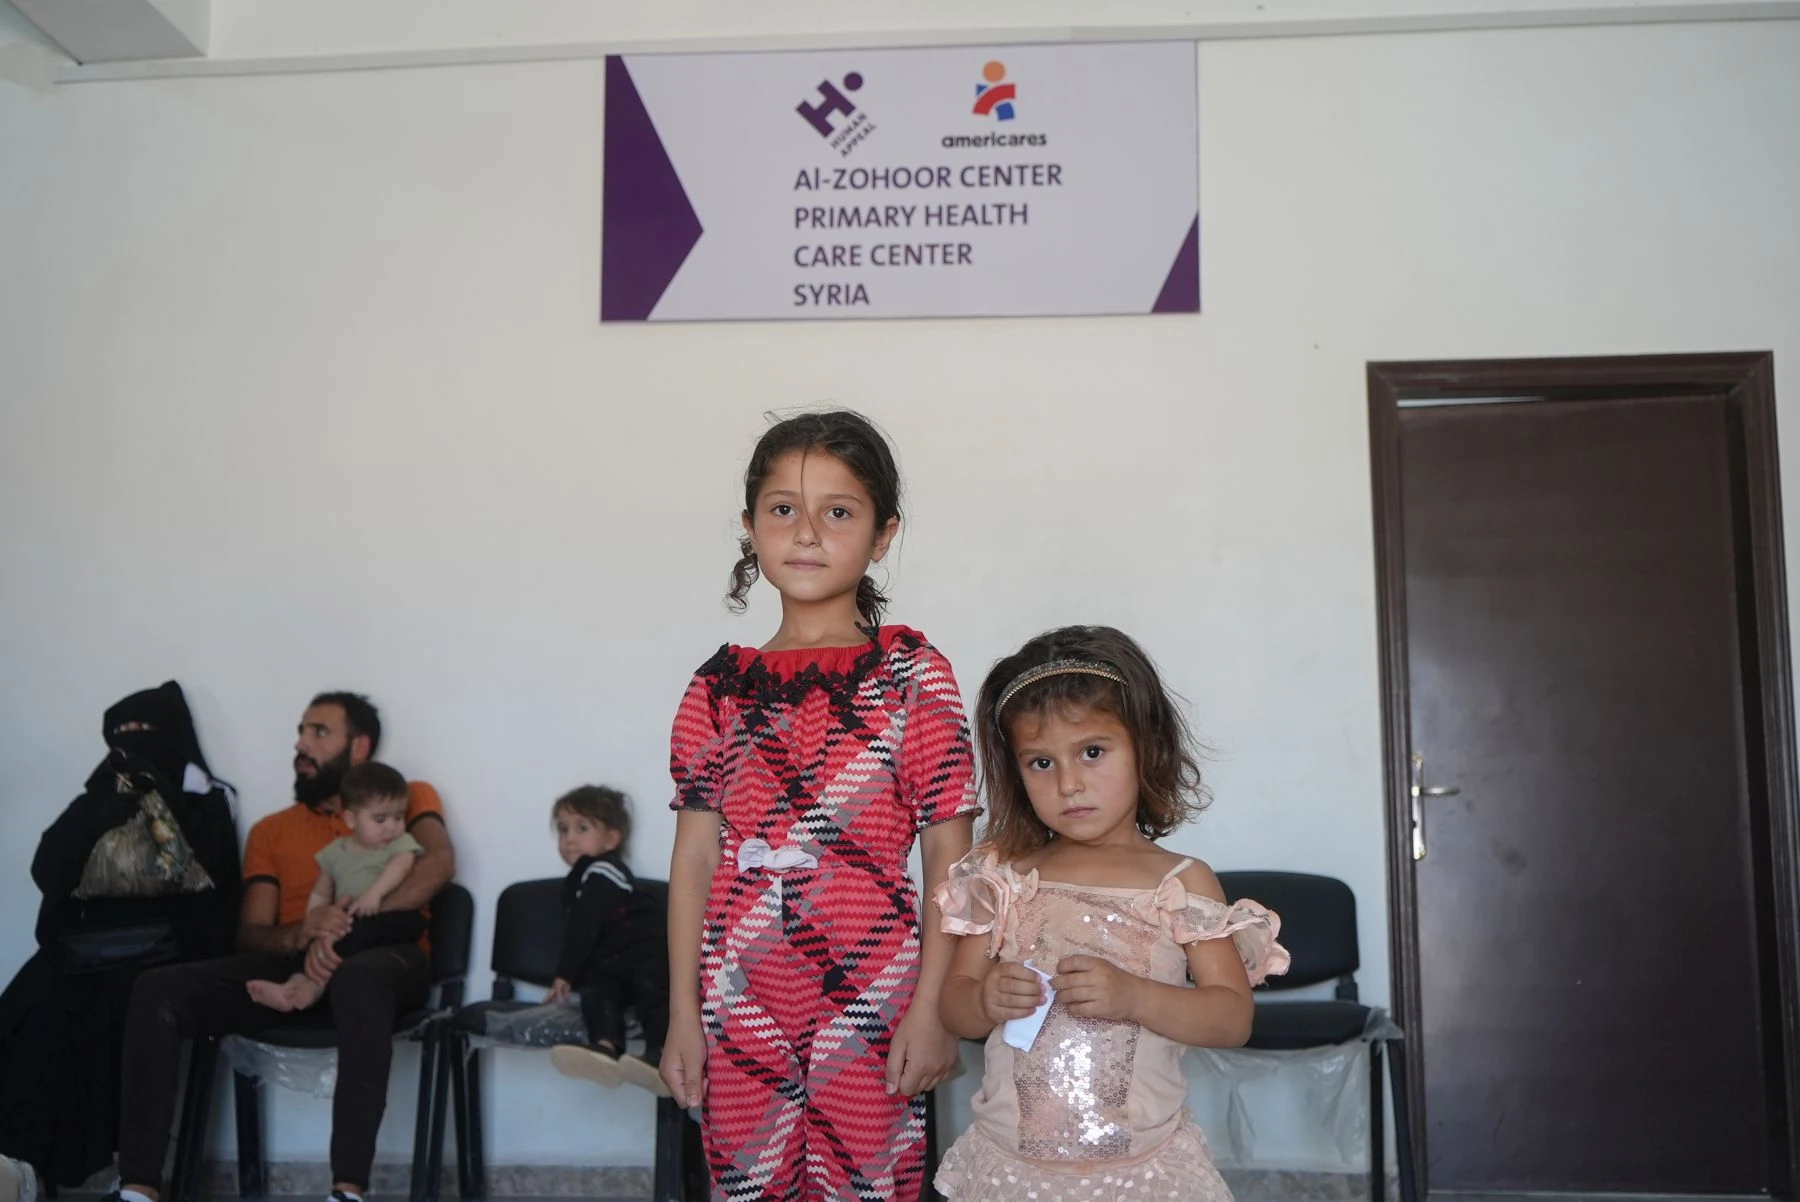 Two young girls, one on left taller in bright pink outfit, younger one on right in light pink. Family with children seated in the background. Sign with Human Appeal, Americares and health center name on wall.